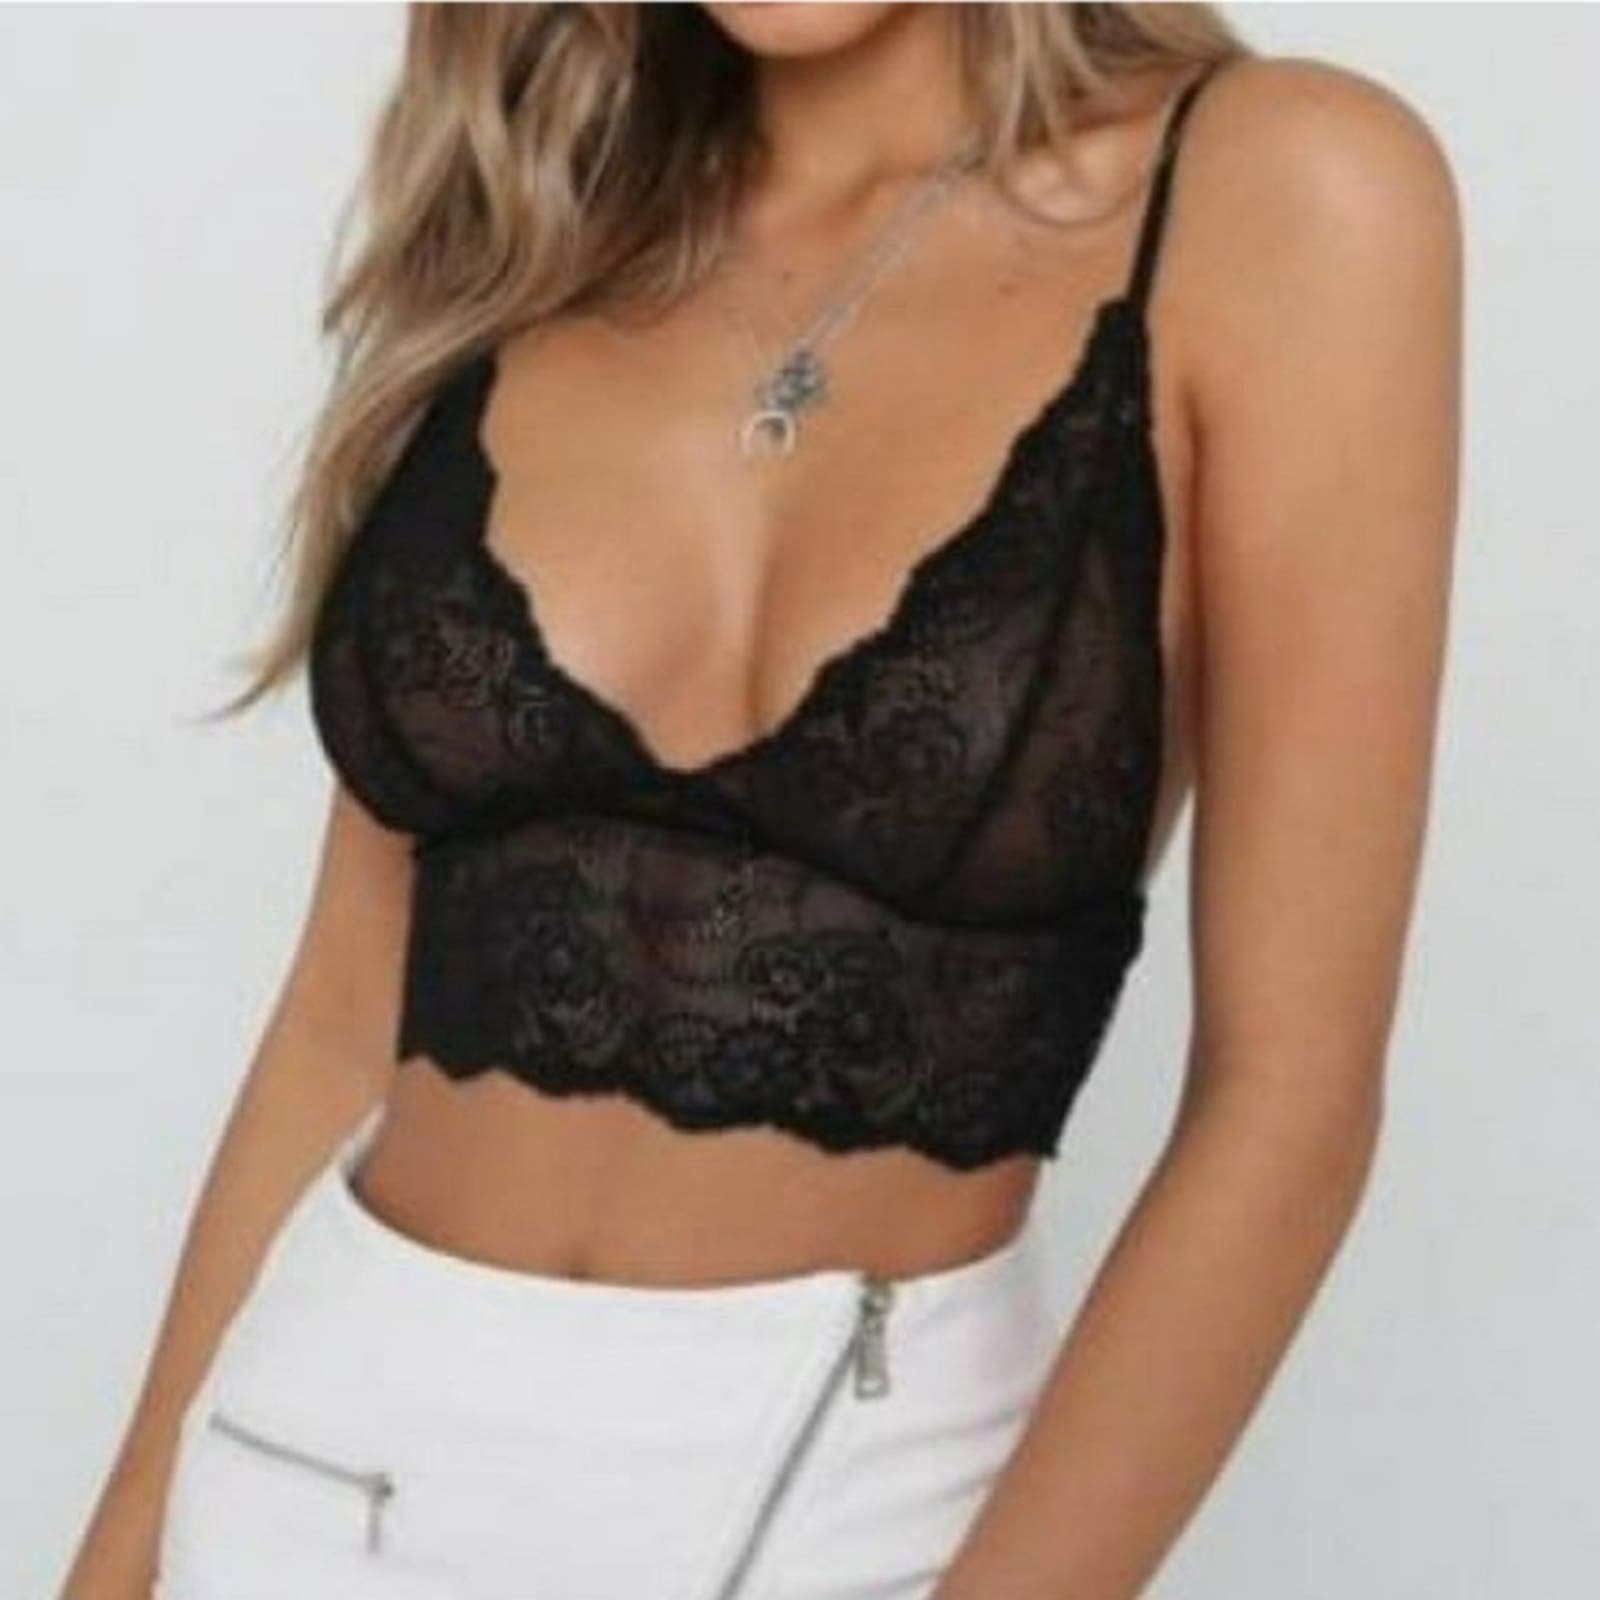 Simple Women´s Black Sexy Sheer Lace V-neck Spaghetti Strap Crop Top Cami Vest Bra SM nFIsxGuES US Outlet